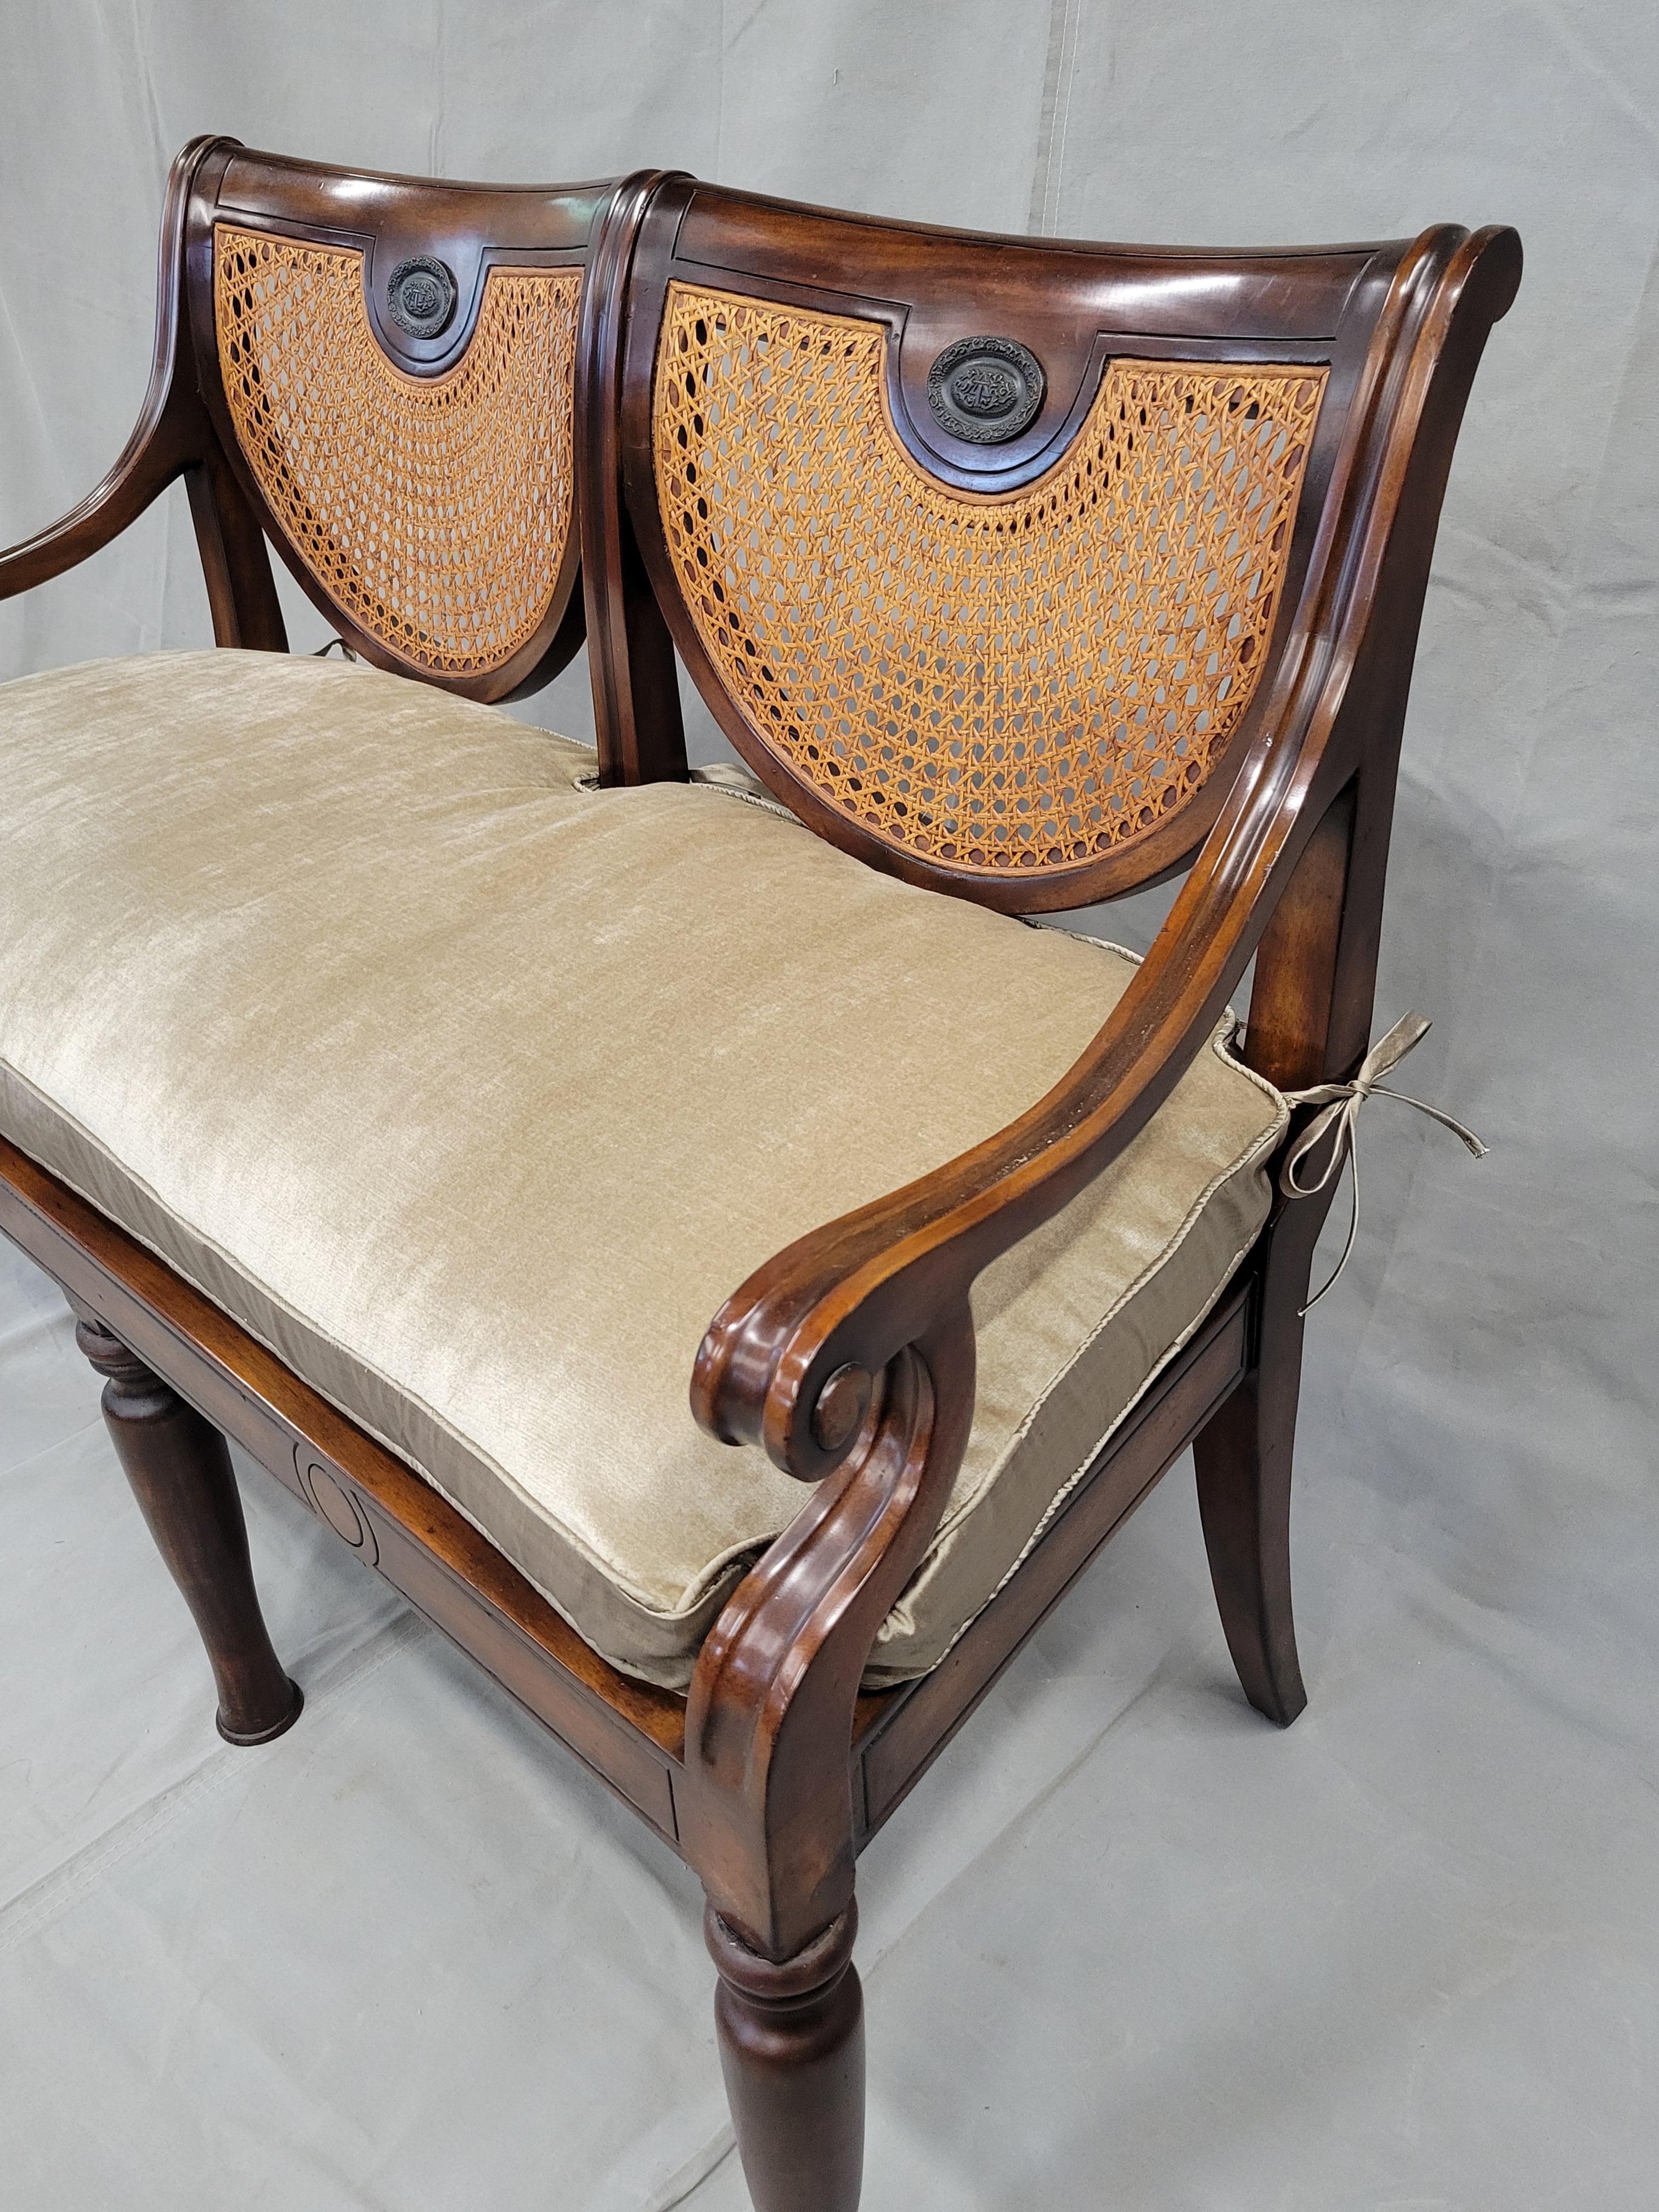 Vintage Theodore Alexander Regency Caned Mahogany Settee With Down Cushion In Good Condition For Sale In Centennial, CO